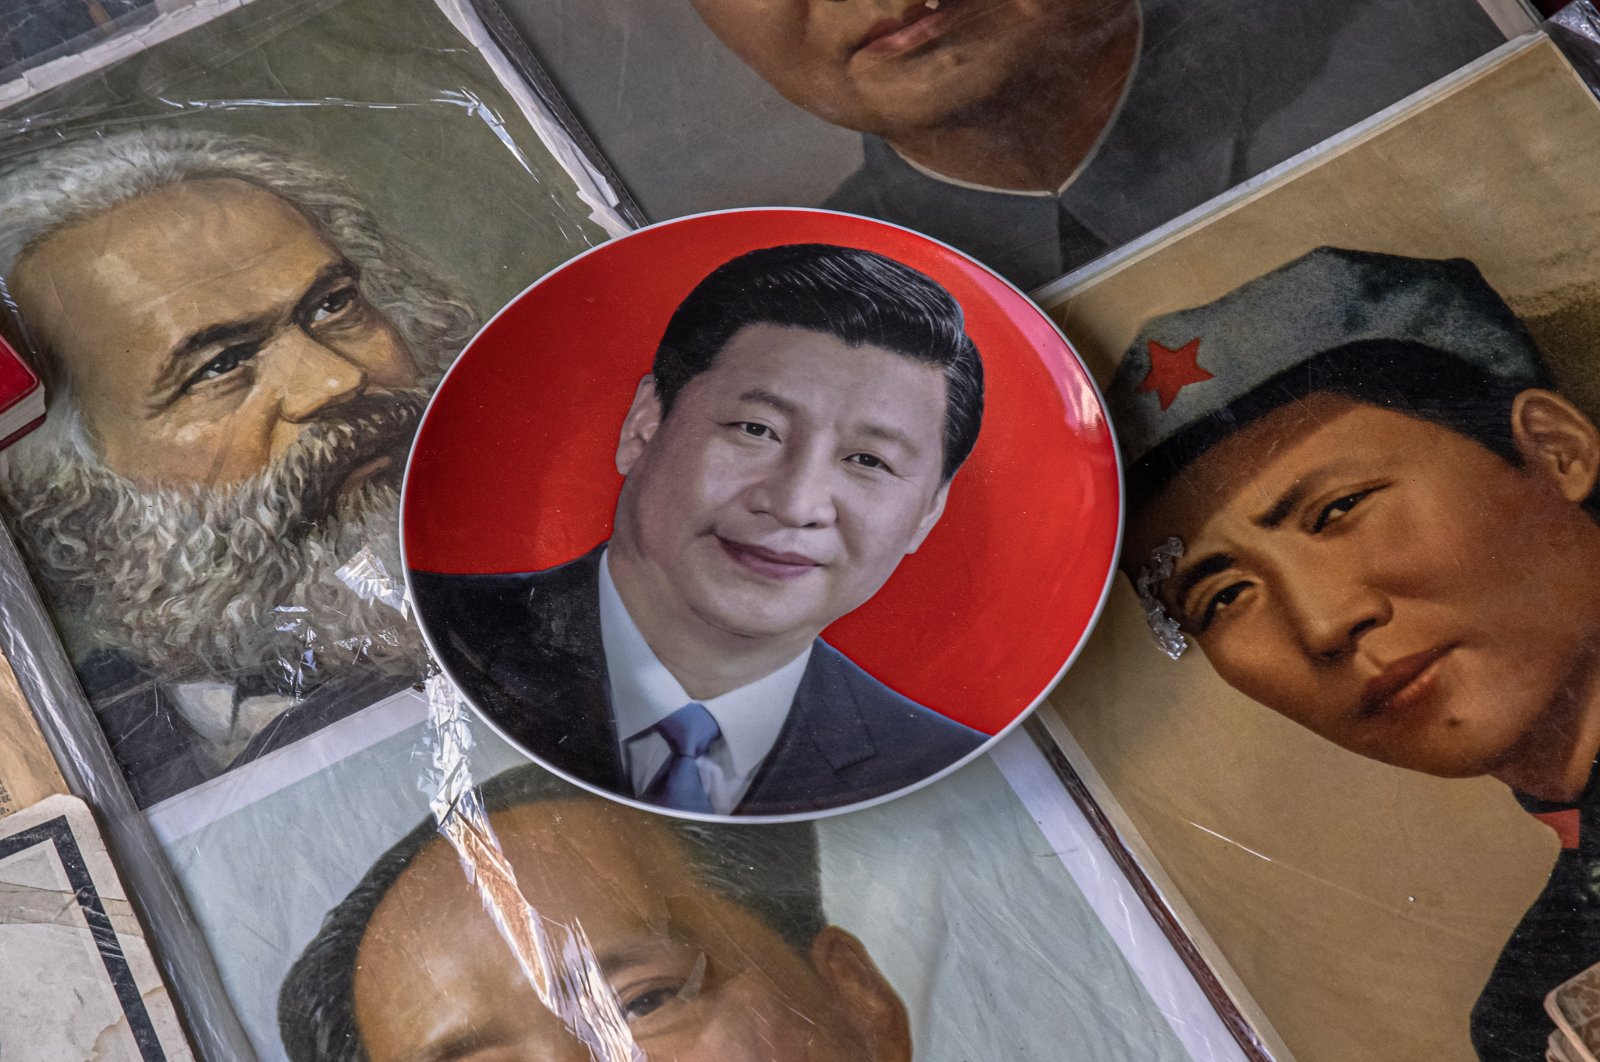 A plate with a picture of Chinese President Xi Jinping lays next to pictures of former leader Mao Zedong and German philosopher and revolutionary socialist Karl Marx, at the Panjiayuan antique market in Beijing, China, Aug. 26, 2021. (EPA Photo)